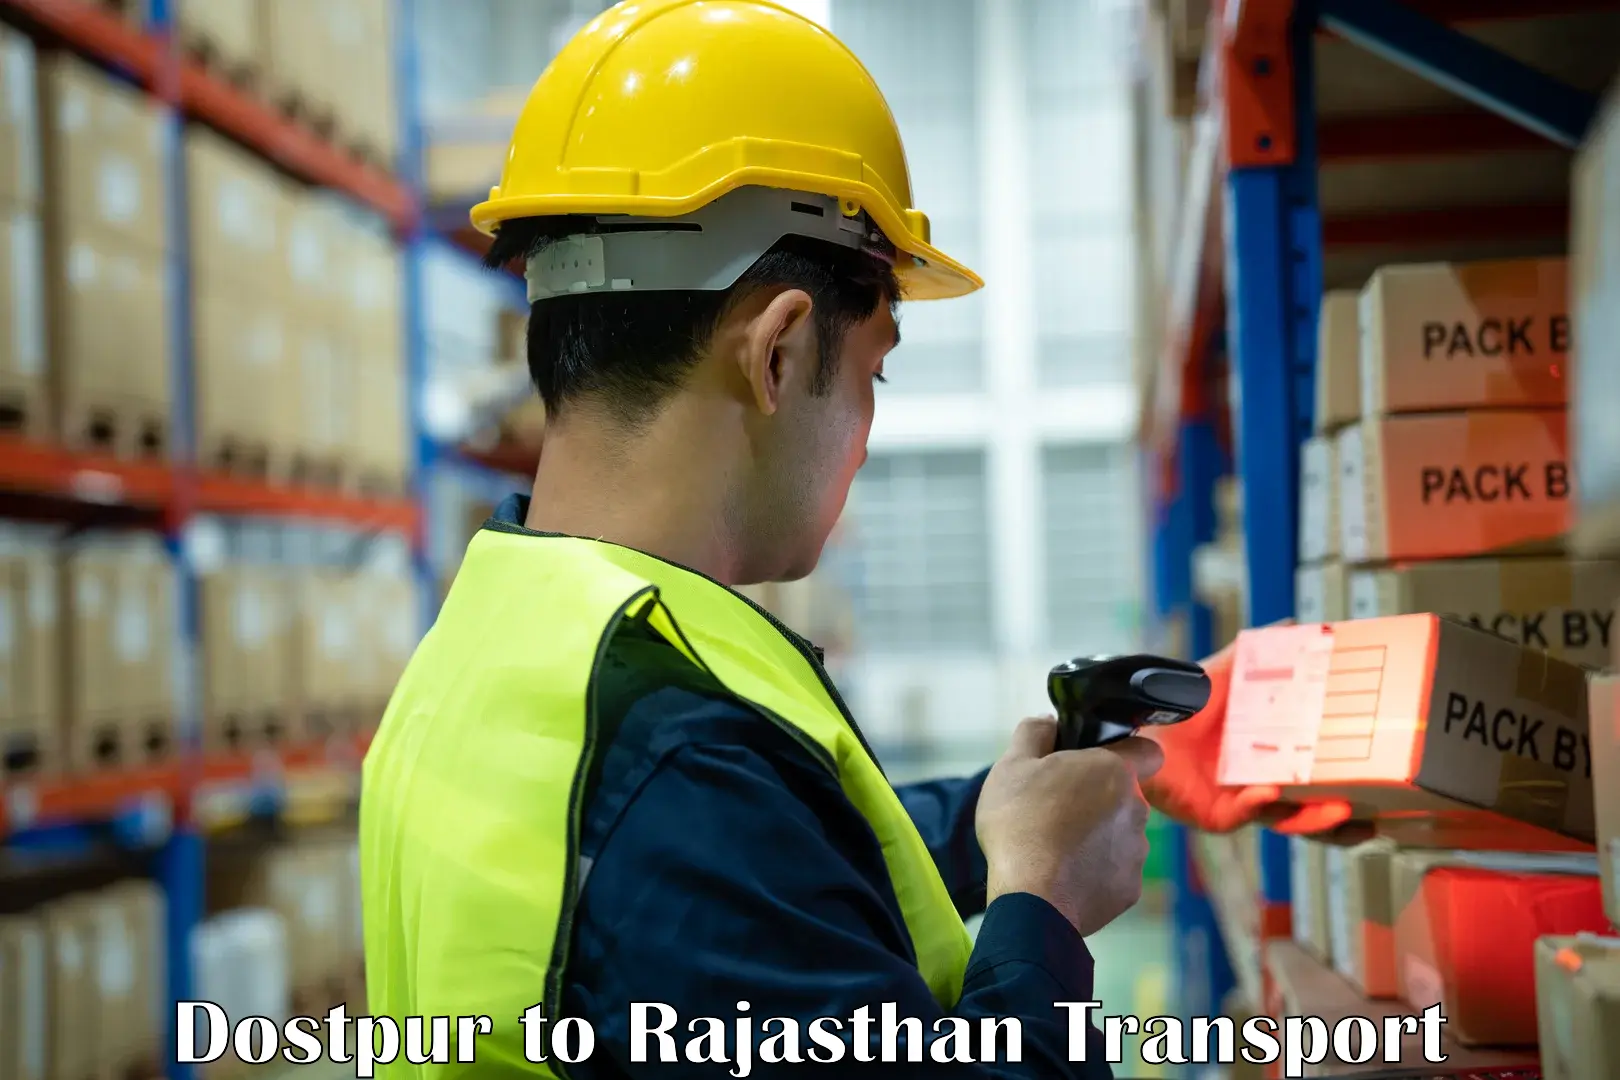 Vehicle parcel service Dostpur to Rajasthan